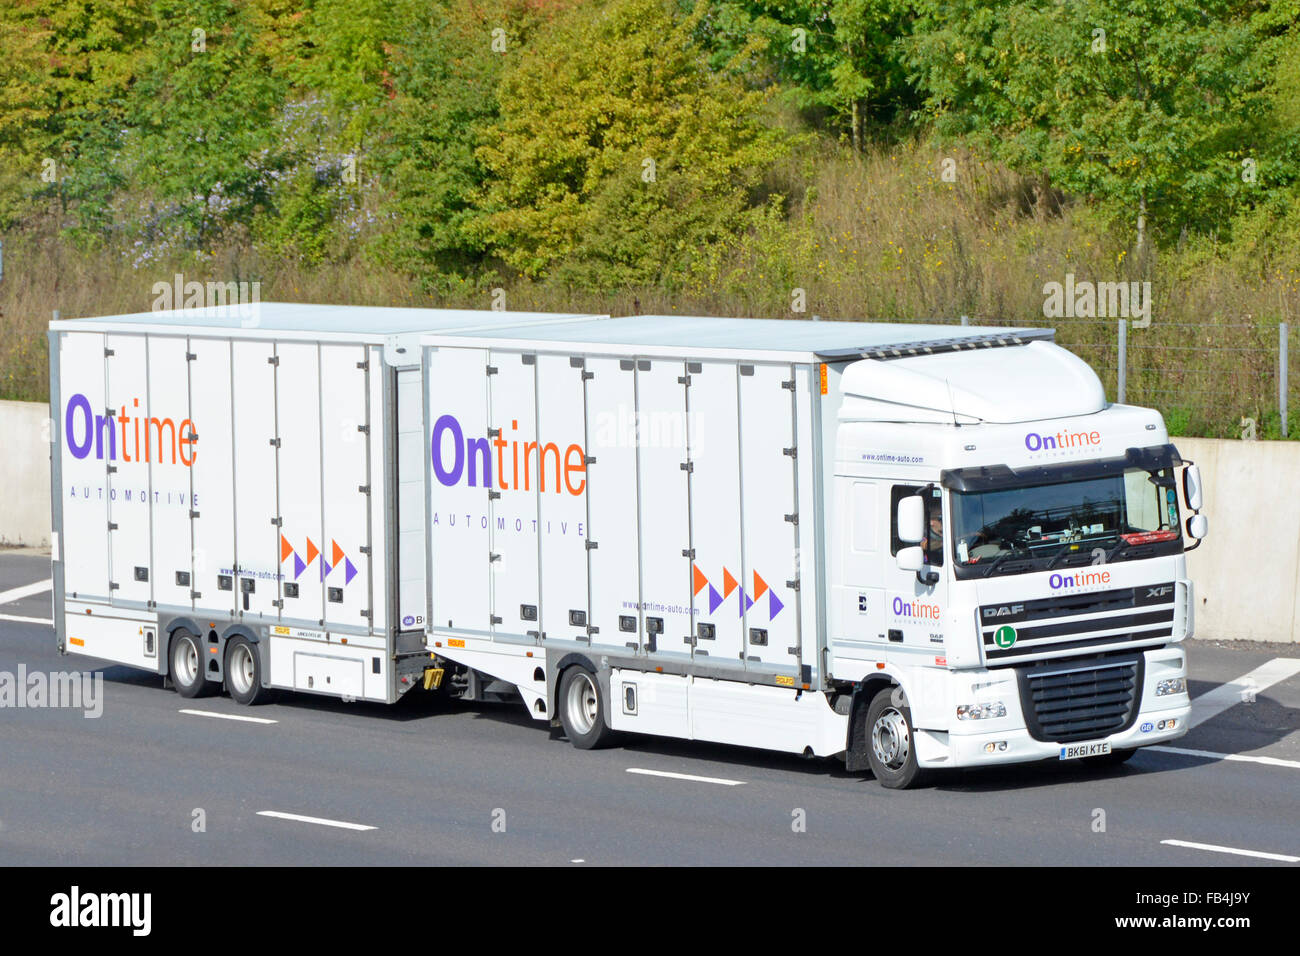 Front side view of Ontime automotive transport business enclosed car delivery hgv lorry truck & trailer operator company logo driving on UK motorway Stock Photo